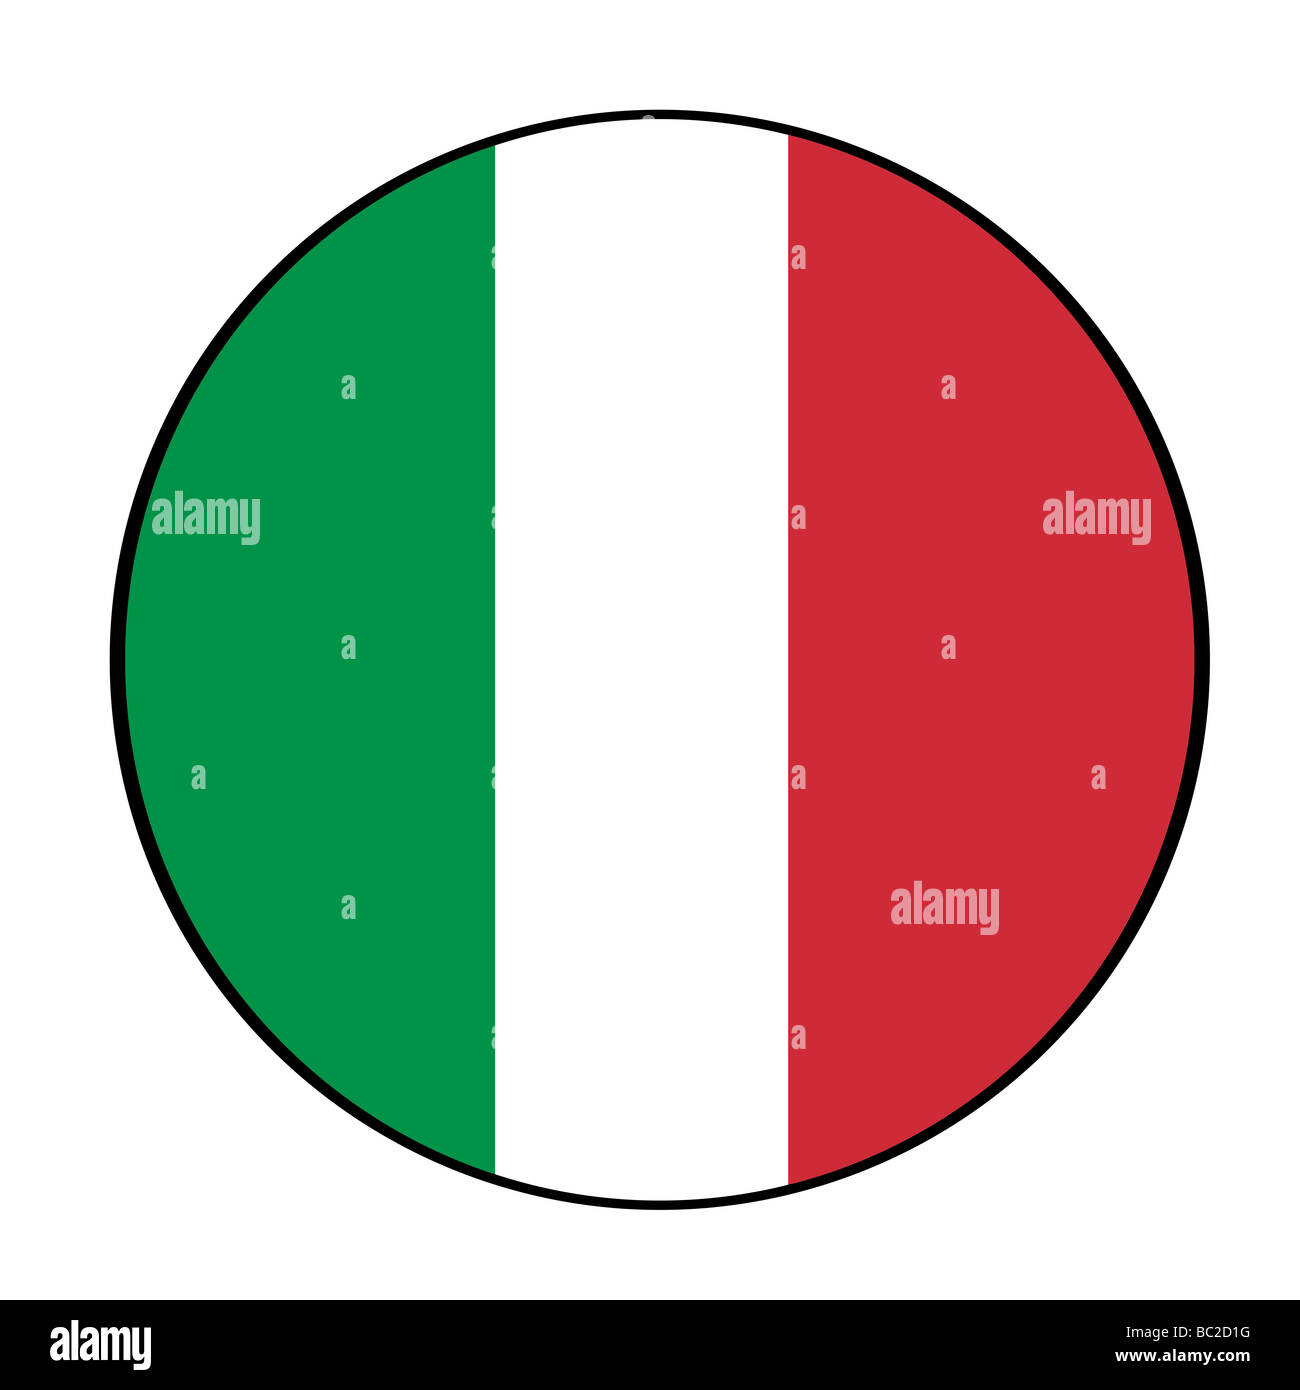 Circular icon button in colors of Italian flag white background Stock Photo